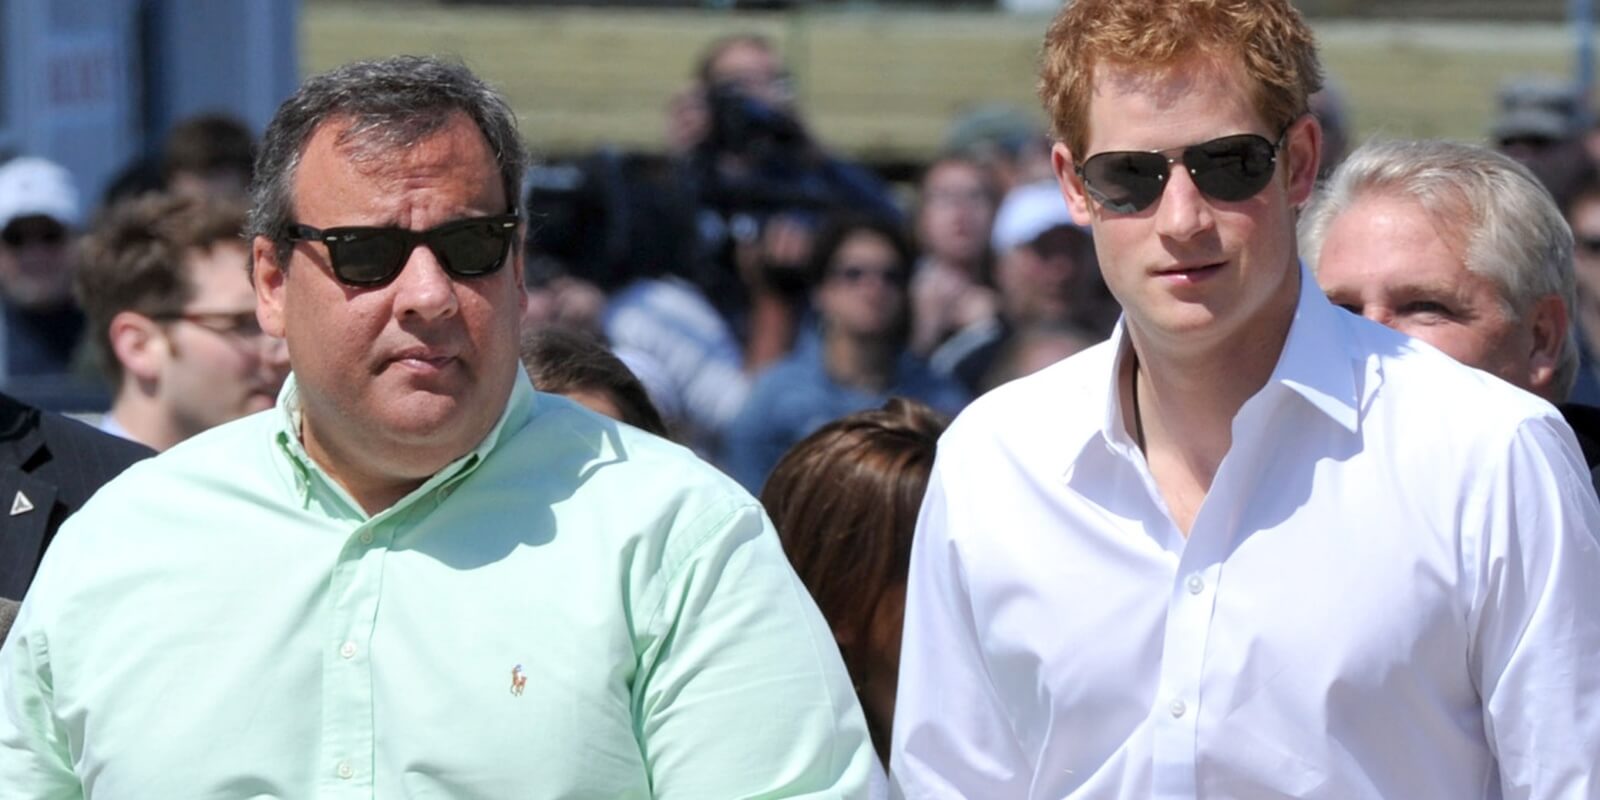 Former New Jersey Governor Chris Christie and Prince Harry tour areas devastated by Superstorm Sandy in 2012.